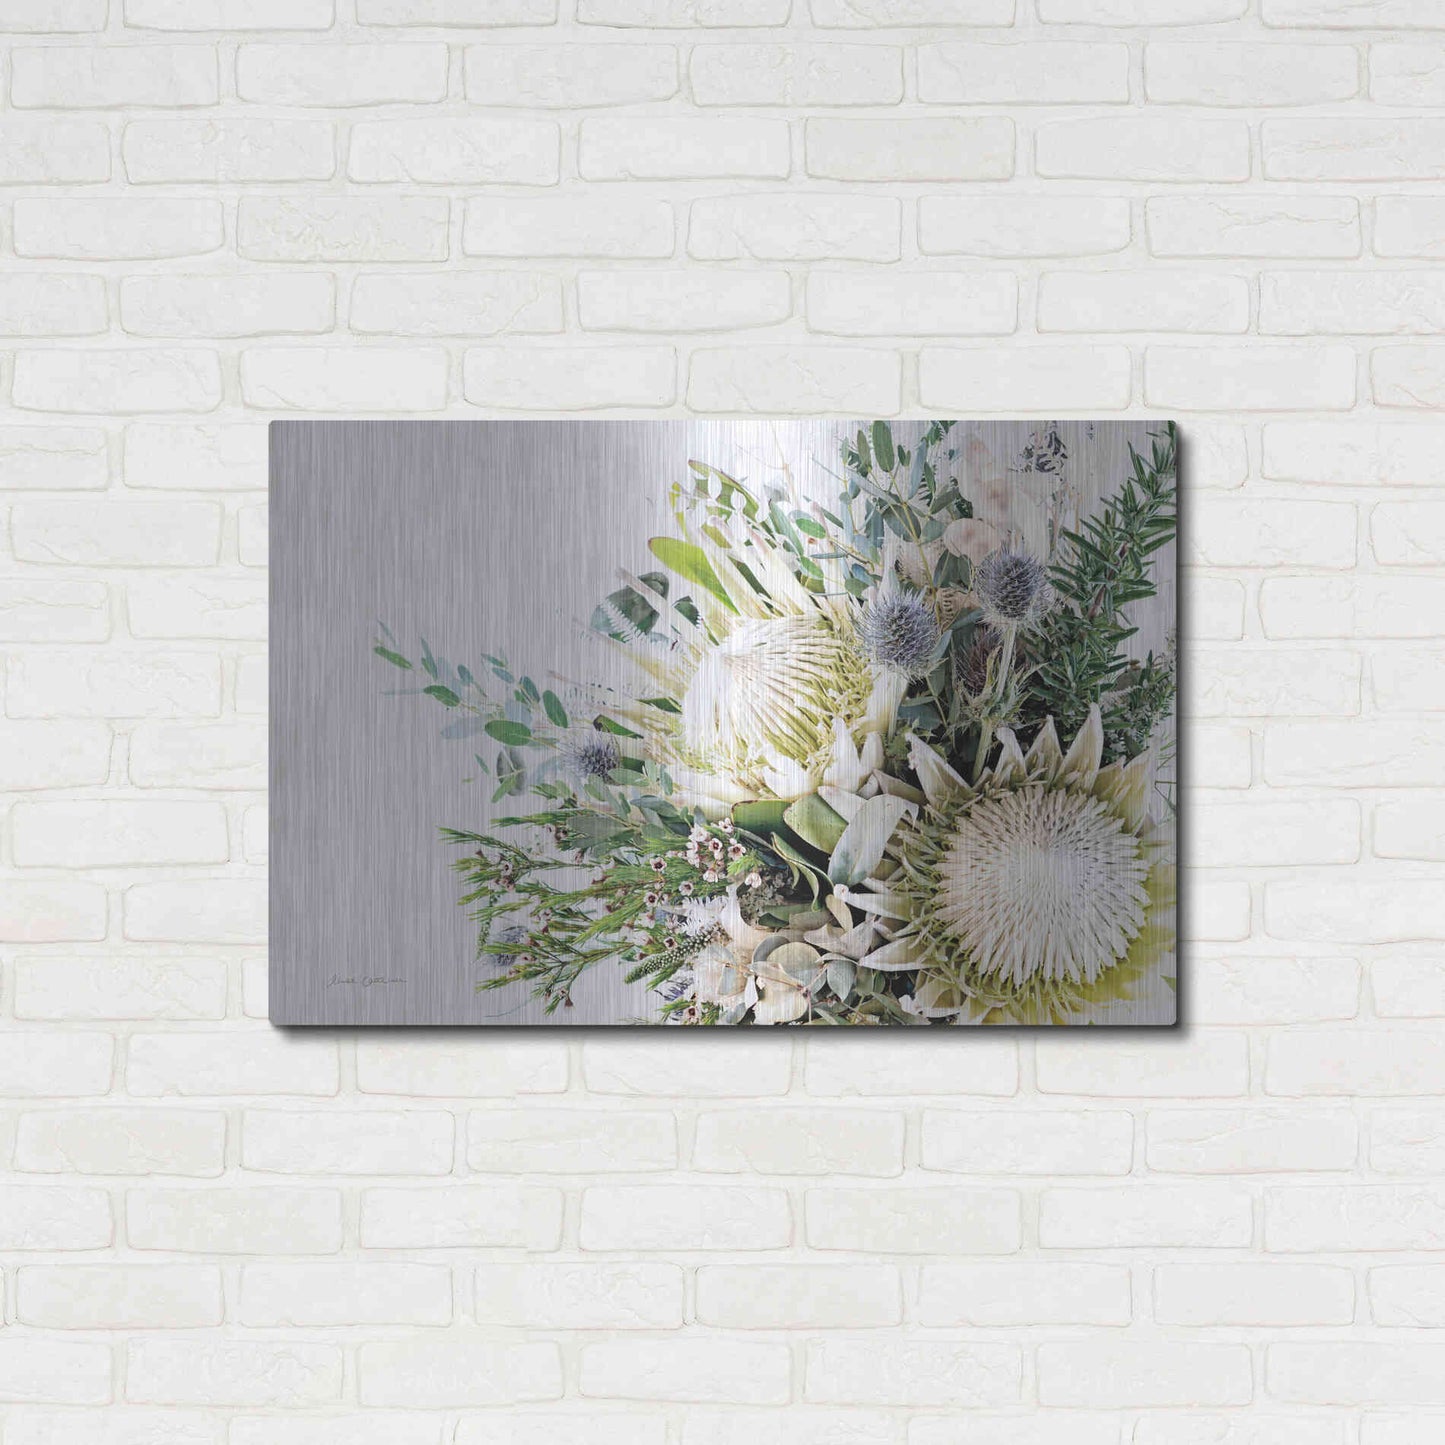 Luxe Metal Art 'Protea Bouquet I' by Elise Catterall, Metal Wall Art,36x24